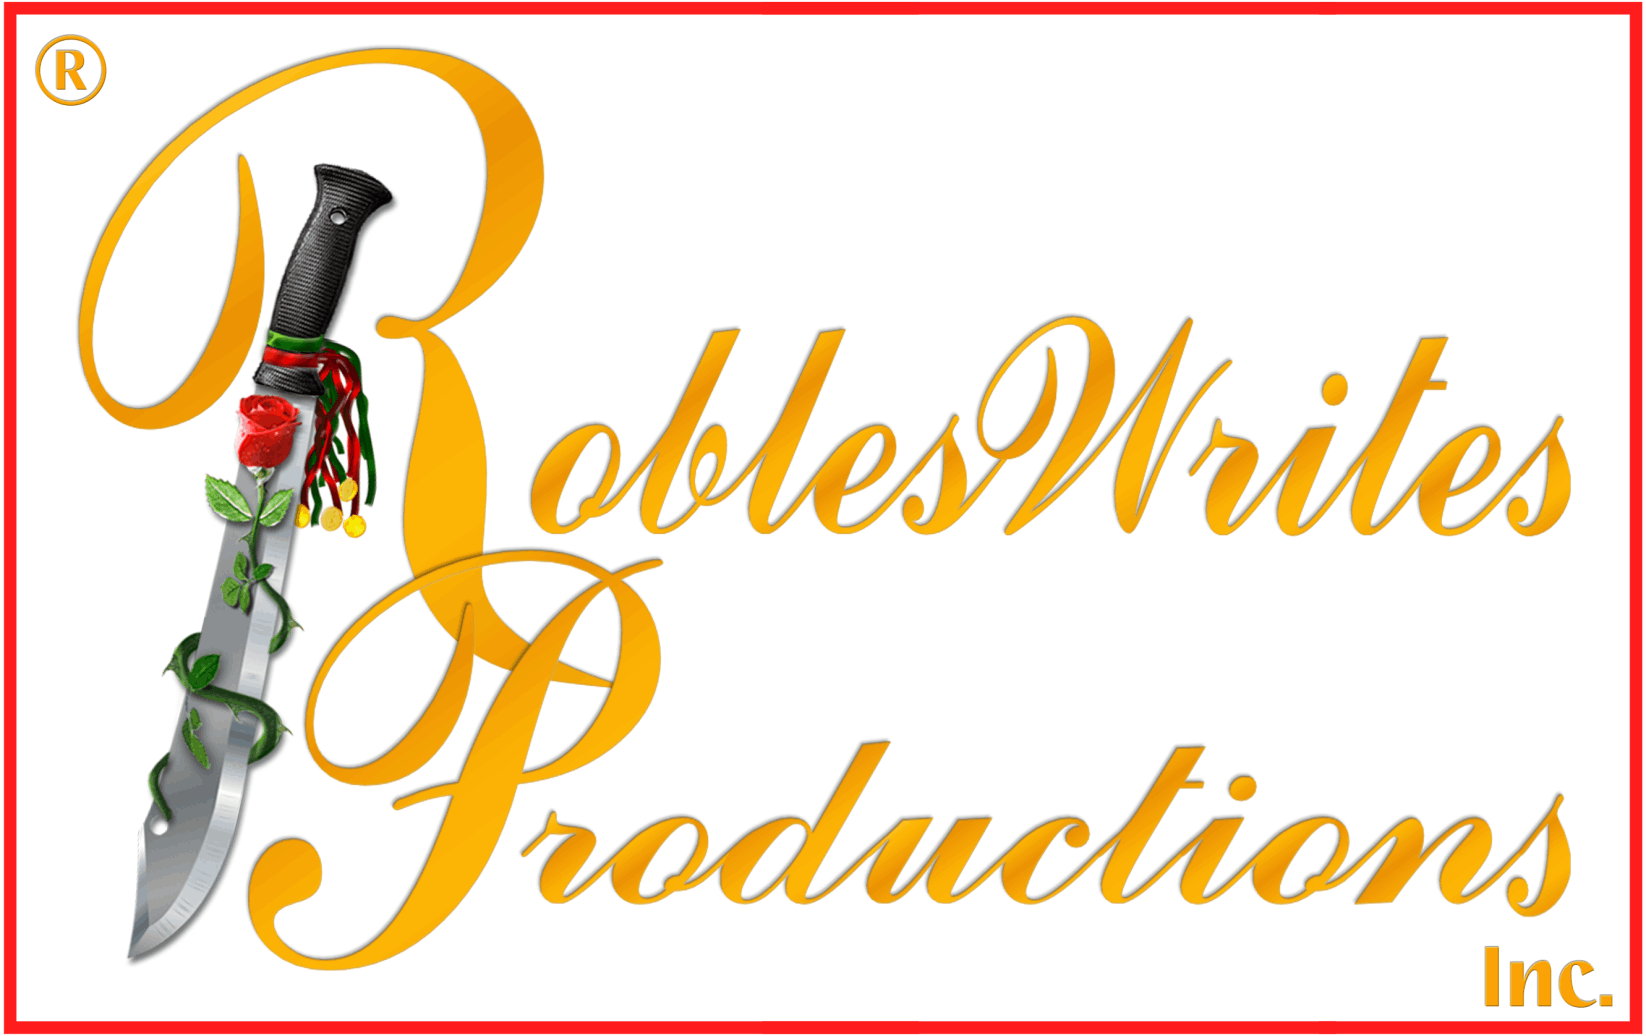 RoblesWritesProduction